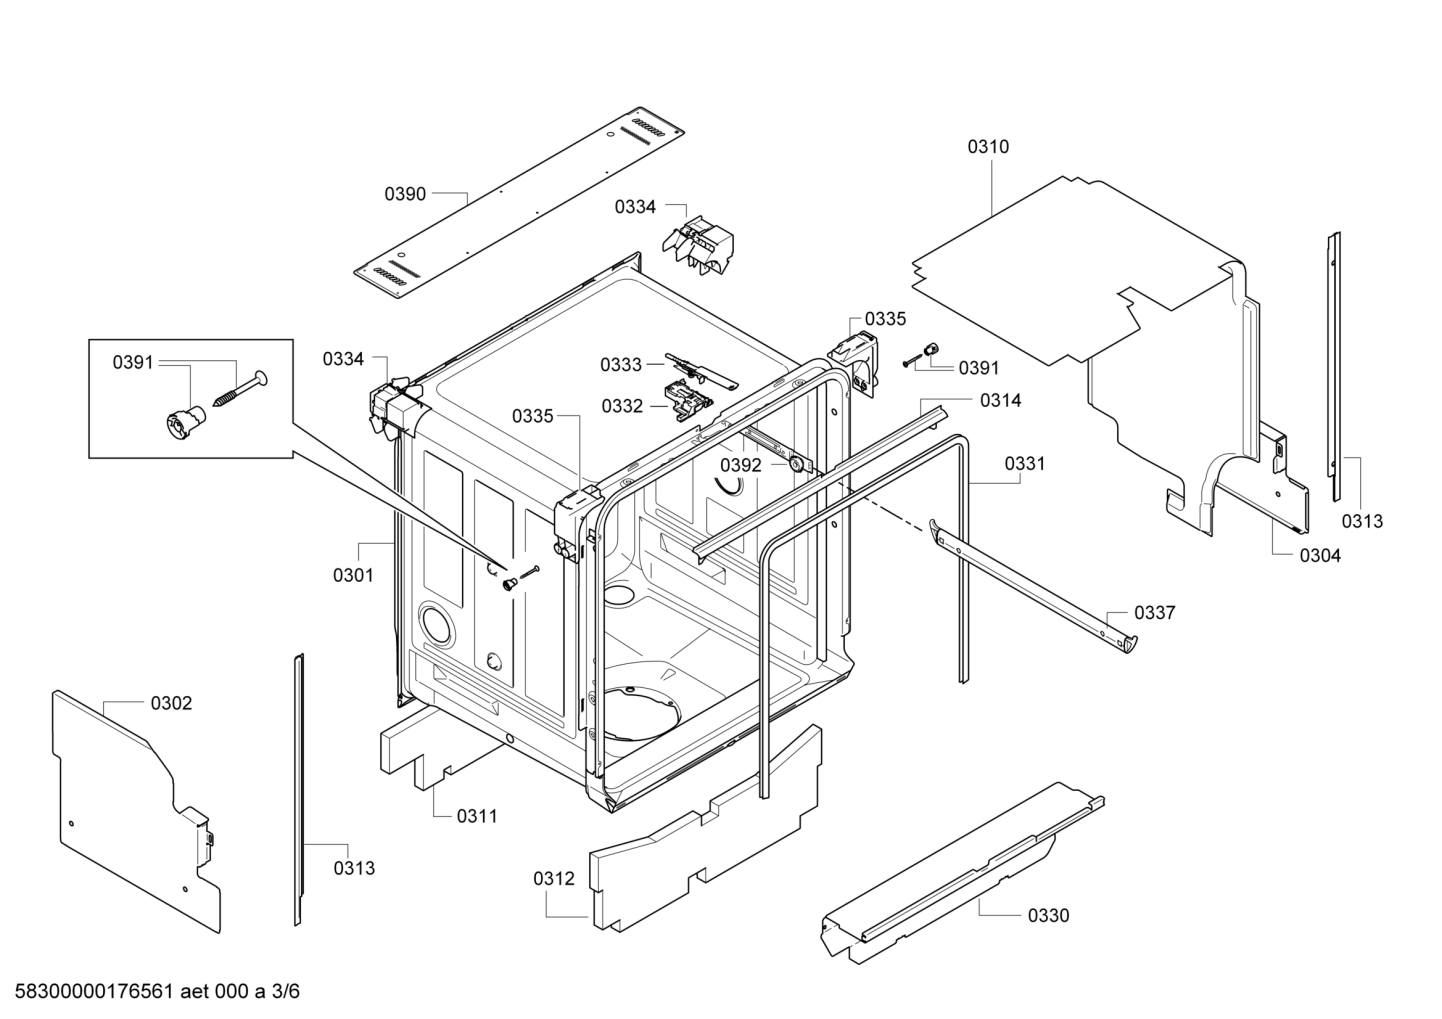 drawing_link_3_device_1767275